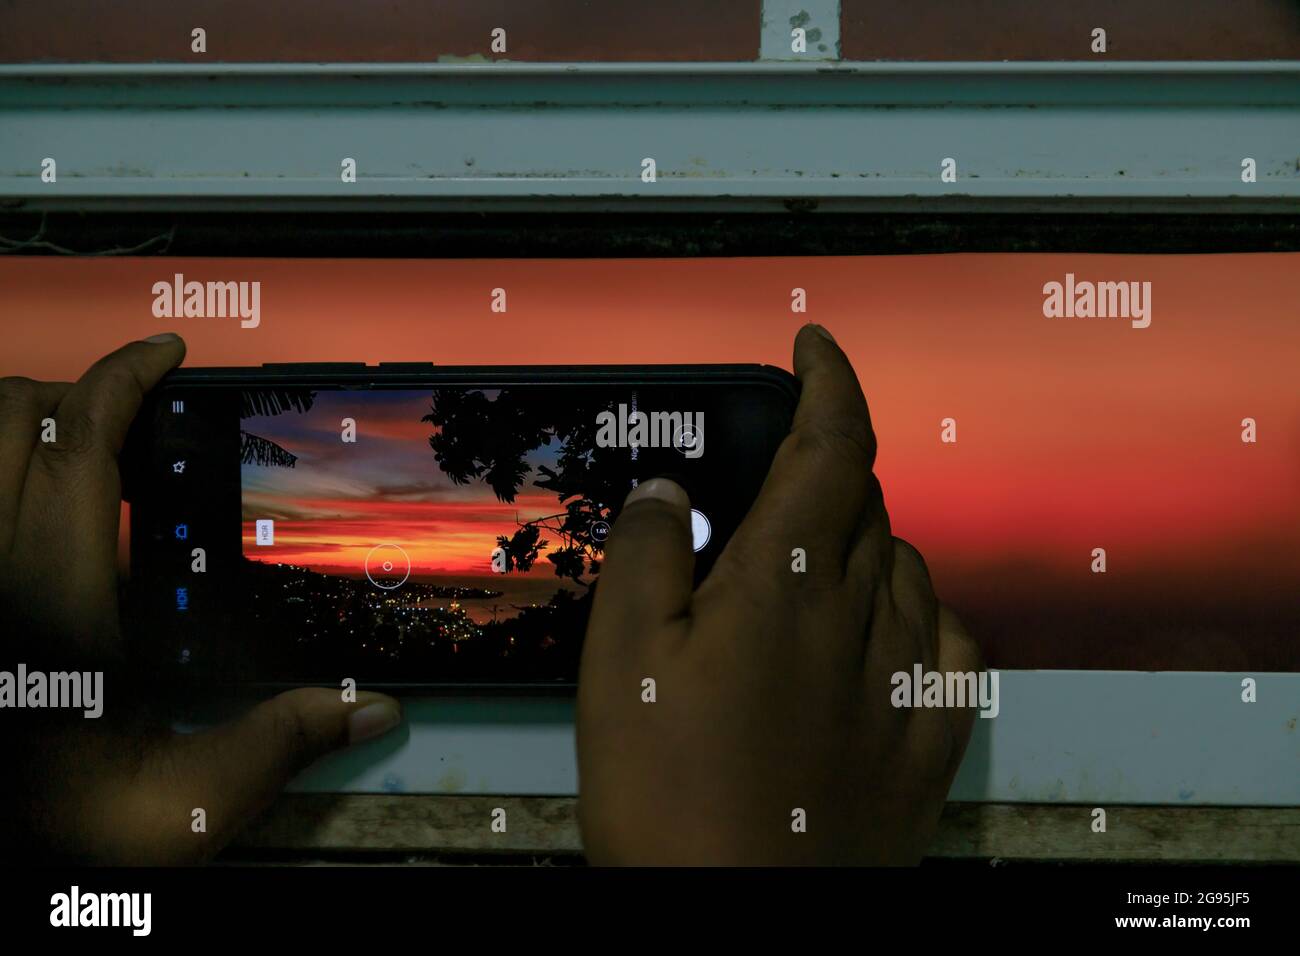 sunset on the screen of a smart phone Stock Photo